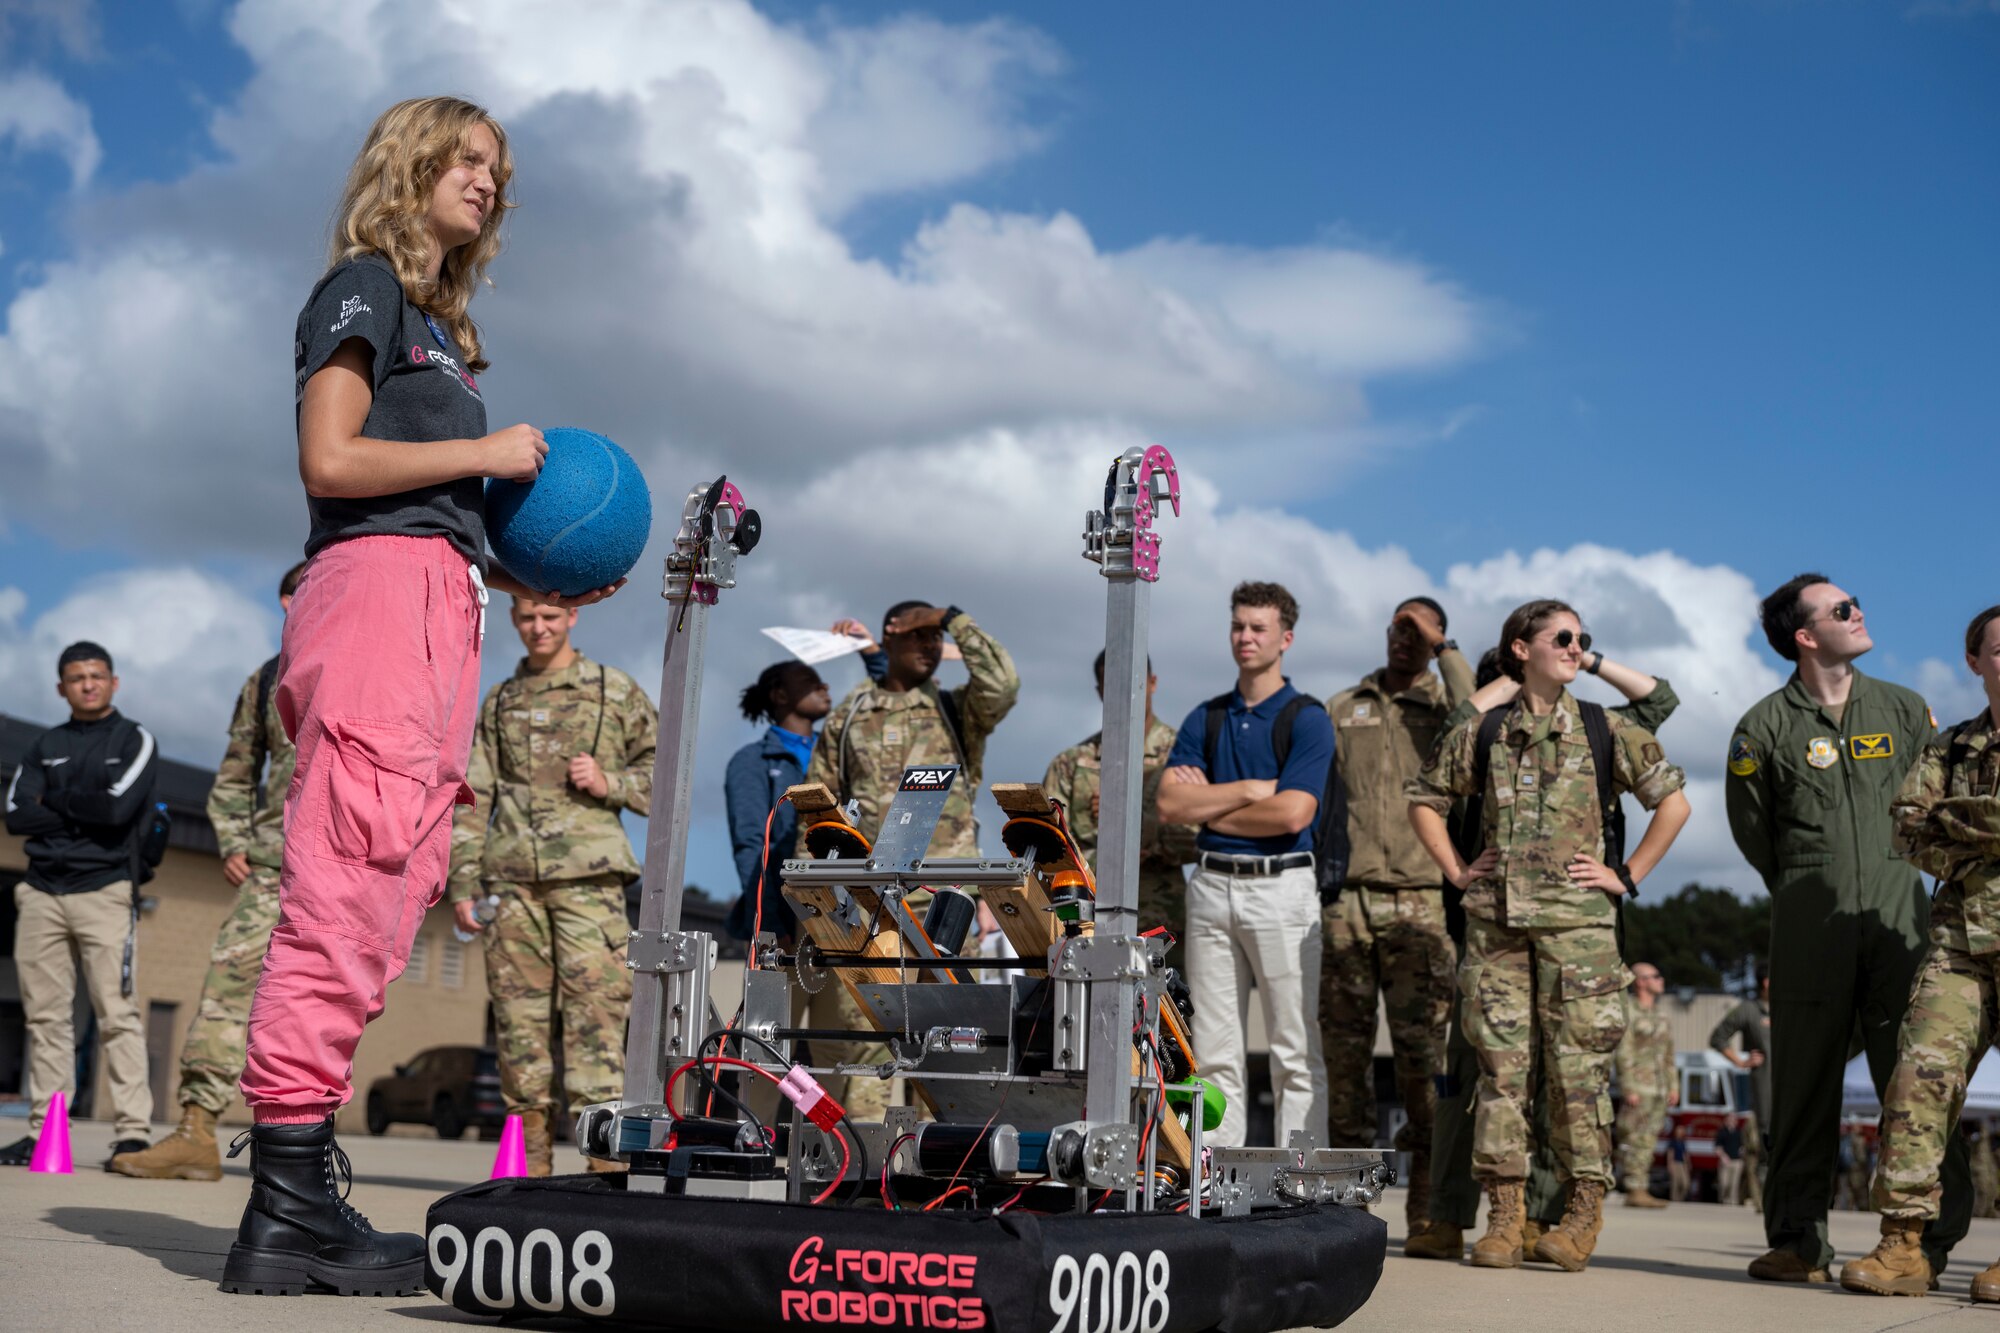 Sloan Mann, a Clayton High School student, utilized a G-Force Robotics robot during Strive 4th: A Project Tuskegee and aviation inspiration mentorship initiative at Seymour Johnson Air Force Base, North Carolina, Nov. 4, 2022